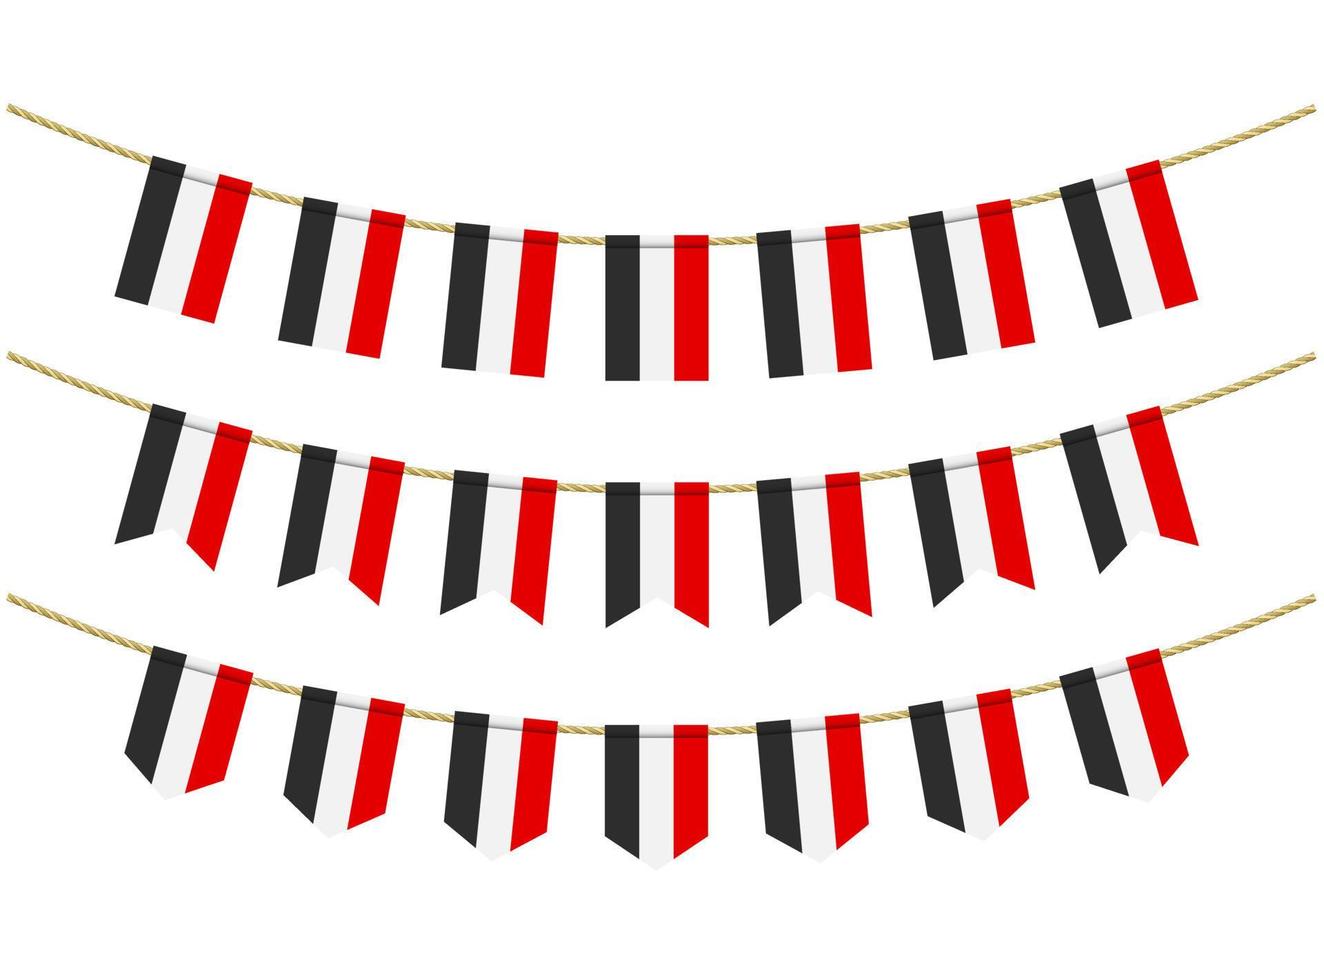 Yemen flag on the ropes on white background. Set of Patriotic bunting flags. Bunting decoration of Yemen flag vector